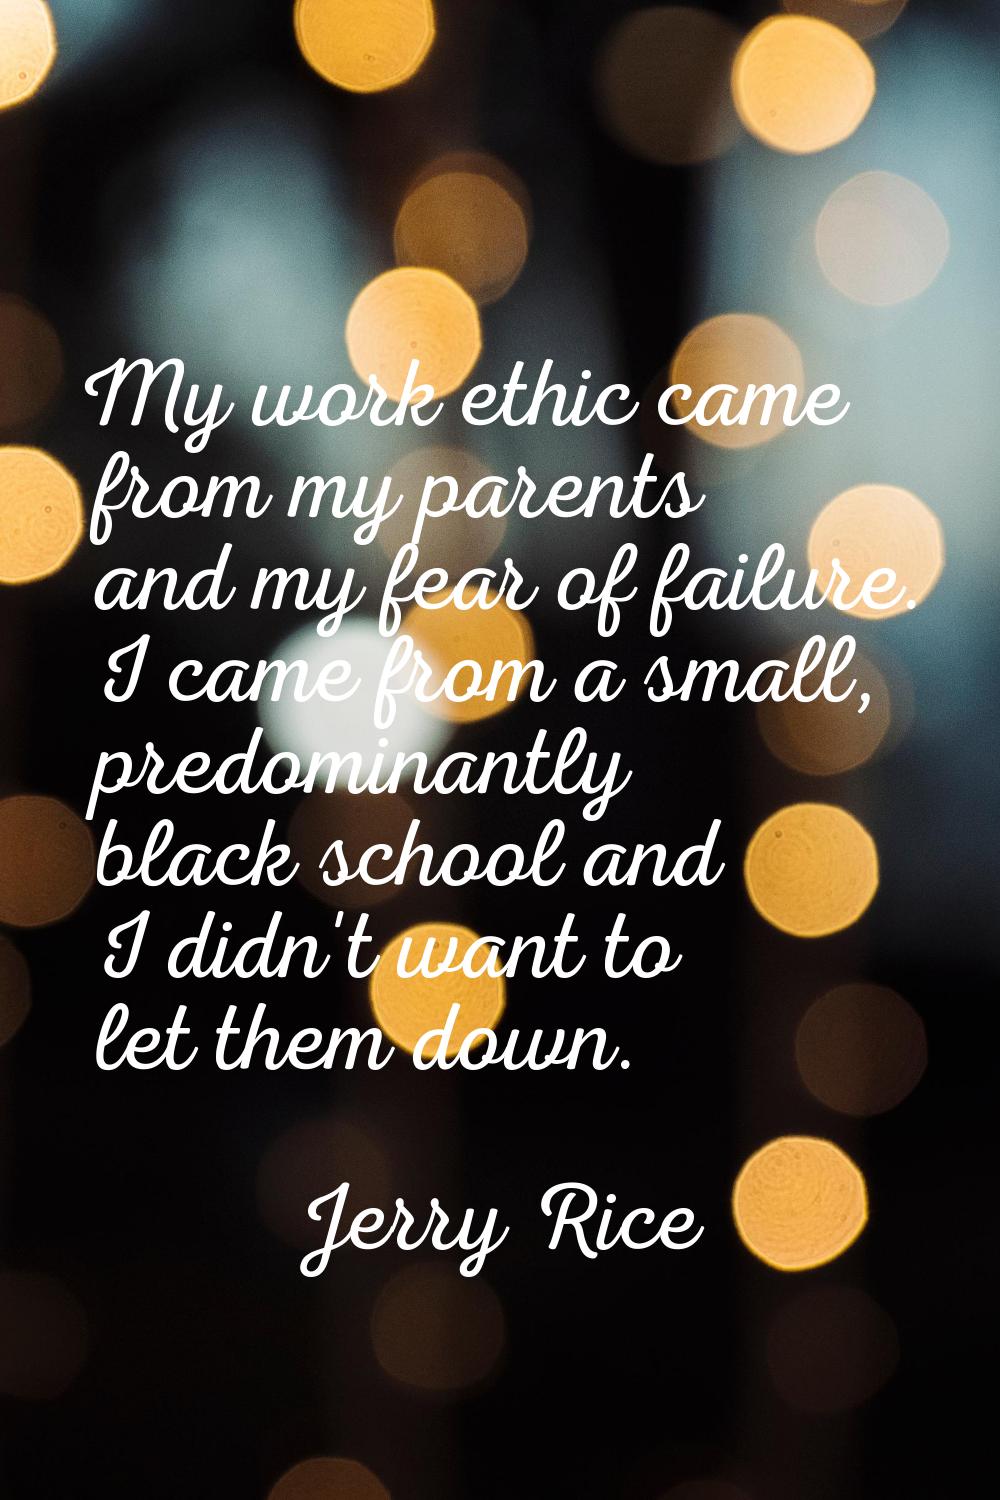 My work ethic came from my parents and my fear of failure. I came from a small, predominantly black